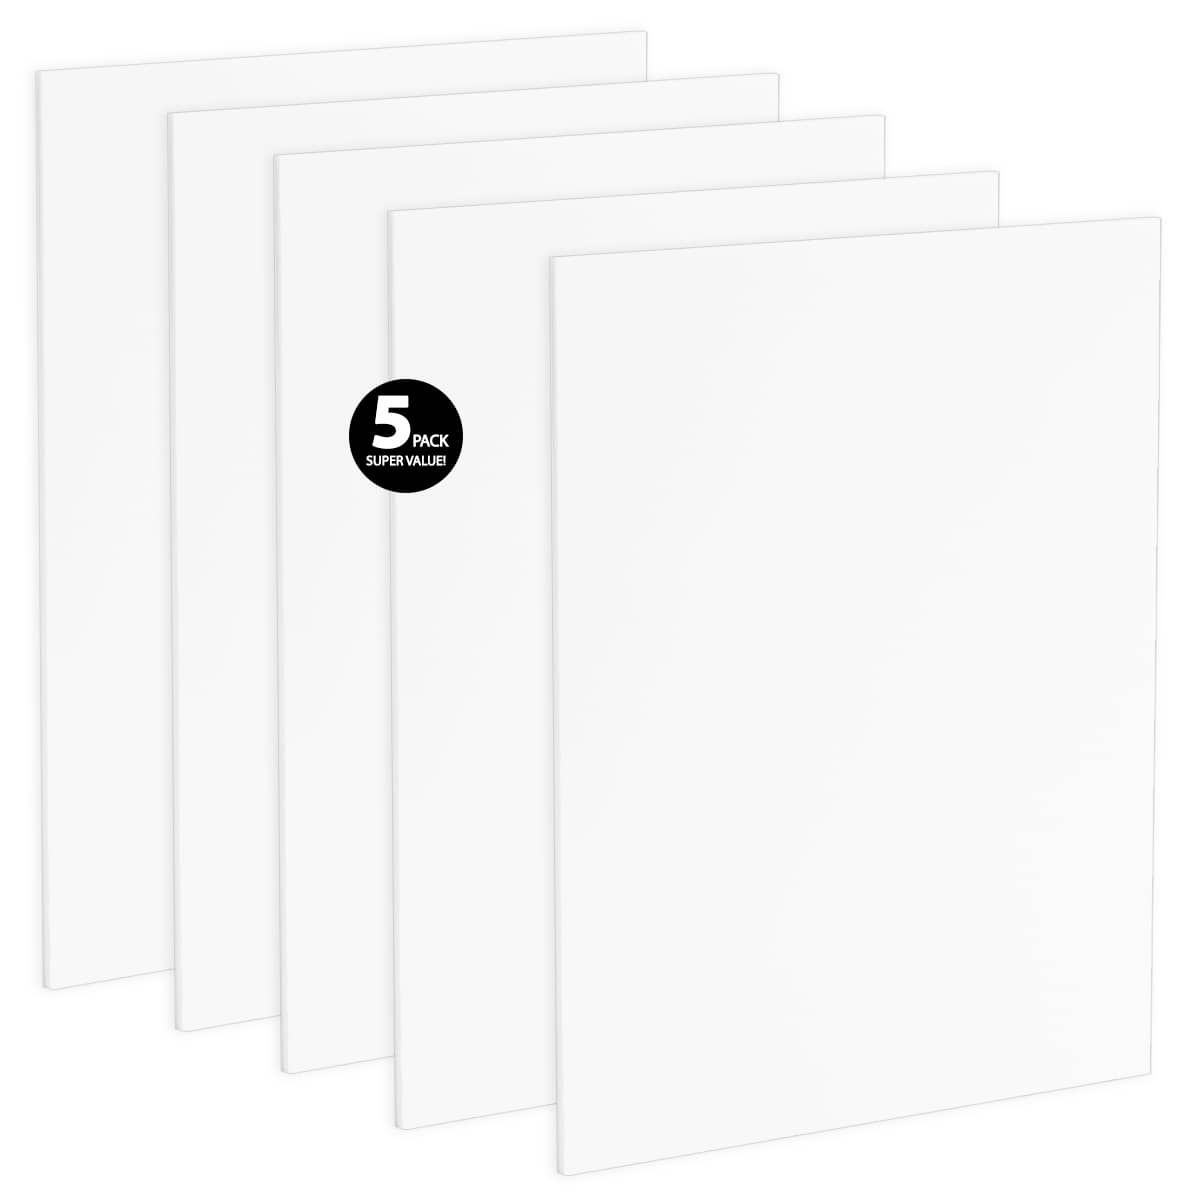 Viewpoint Acid-Free White Foam Backing 11x17, 1/8 Thick 5 Pack